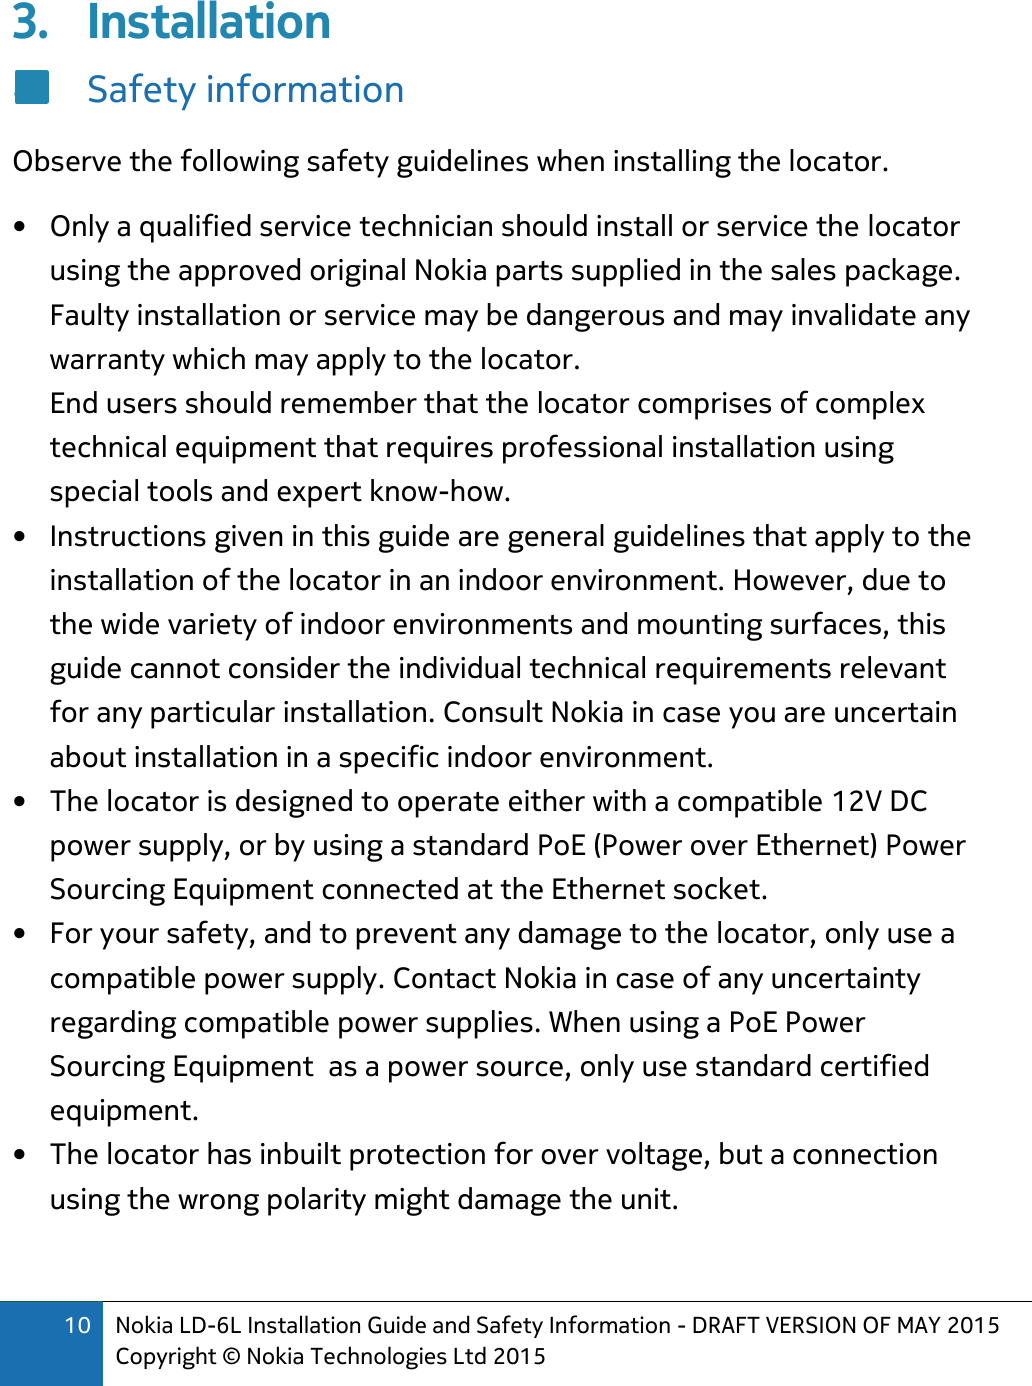 10 Nokia LD-6L Installation Guide and Safety Information - DRAFT VERSION OF MAY 2015 Copyright © Nokia Technologies Ltd 2015  3. Installation 4. Safety information Observe the following safety guidelines when installing the locator. • Only a qualified service technician should install or service the locator using the approved original Nokia parts supplied in the sales package. Faulty installation or service may be dangerous and may invalidate any warranty which may apply to the locator. End users should remember that the locator comprises of complex technical equipment that requires professional installation using special tools and expert know-how. • Instructions given in this guide are general guidelines that apply to the installation of the locator in an indoor environment. However, due to the wide variety of indoor environments and mounting surfaces, this guide cannot consider the individual technical requirements relevant for any particular installation. Consult Nokia in case you are uncertain about installation in a specific indoor environment. • The locator is designed to operate either with a compatible 12V DC power supply, or by using a standard PoE (Power over Ethernet) Power Sourcing Equipment connected at the Ethernet socket.  • For your safety, and to prevent any damage to the locator, only use a compatible power supply. Contact Nokia in case of any uncertainty regarding compatible power supplies. When using a PoE Power Sourcing Equipment  as a power source, only use standard certified  equipment. • The locator has inbuilt protection for over voltage, but a connection using the wrong polarity might damage the unit. 